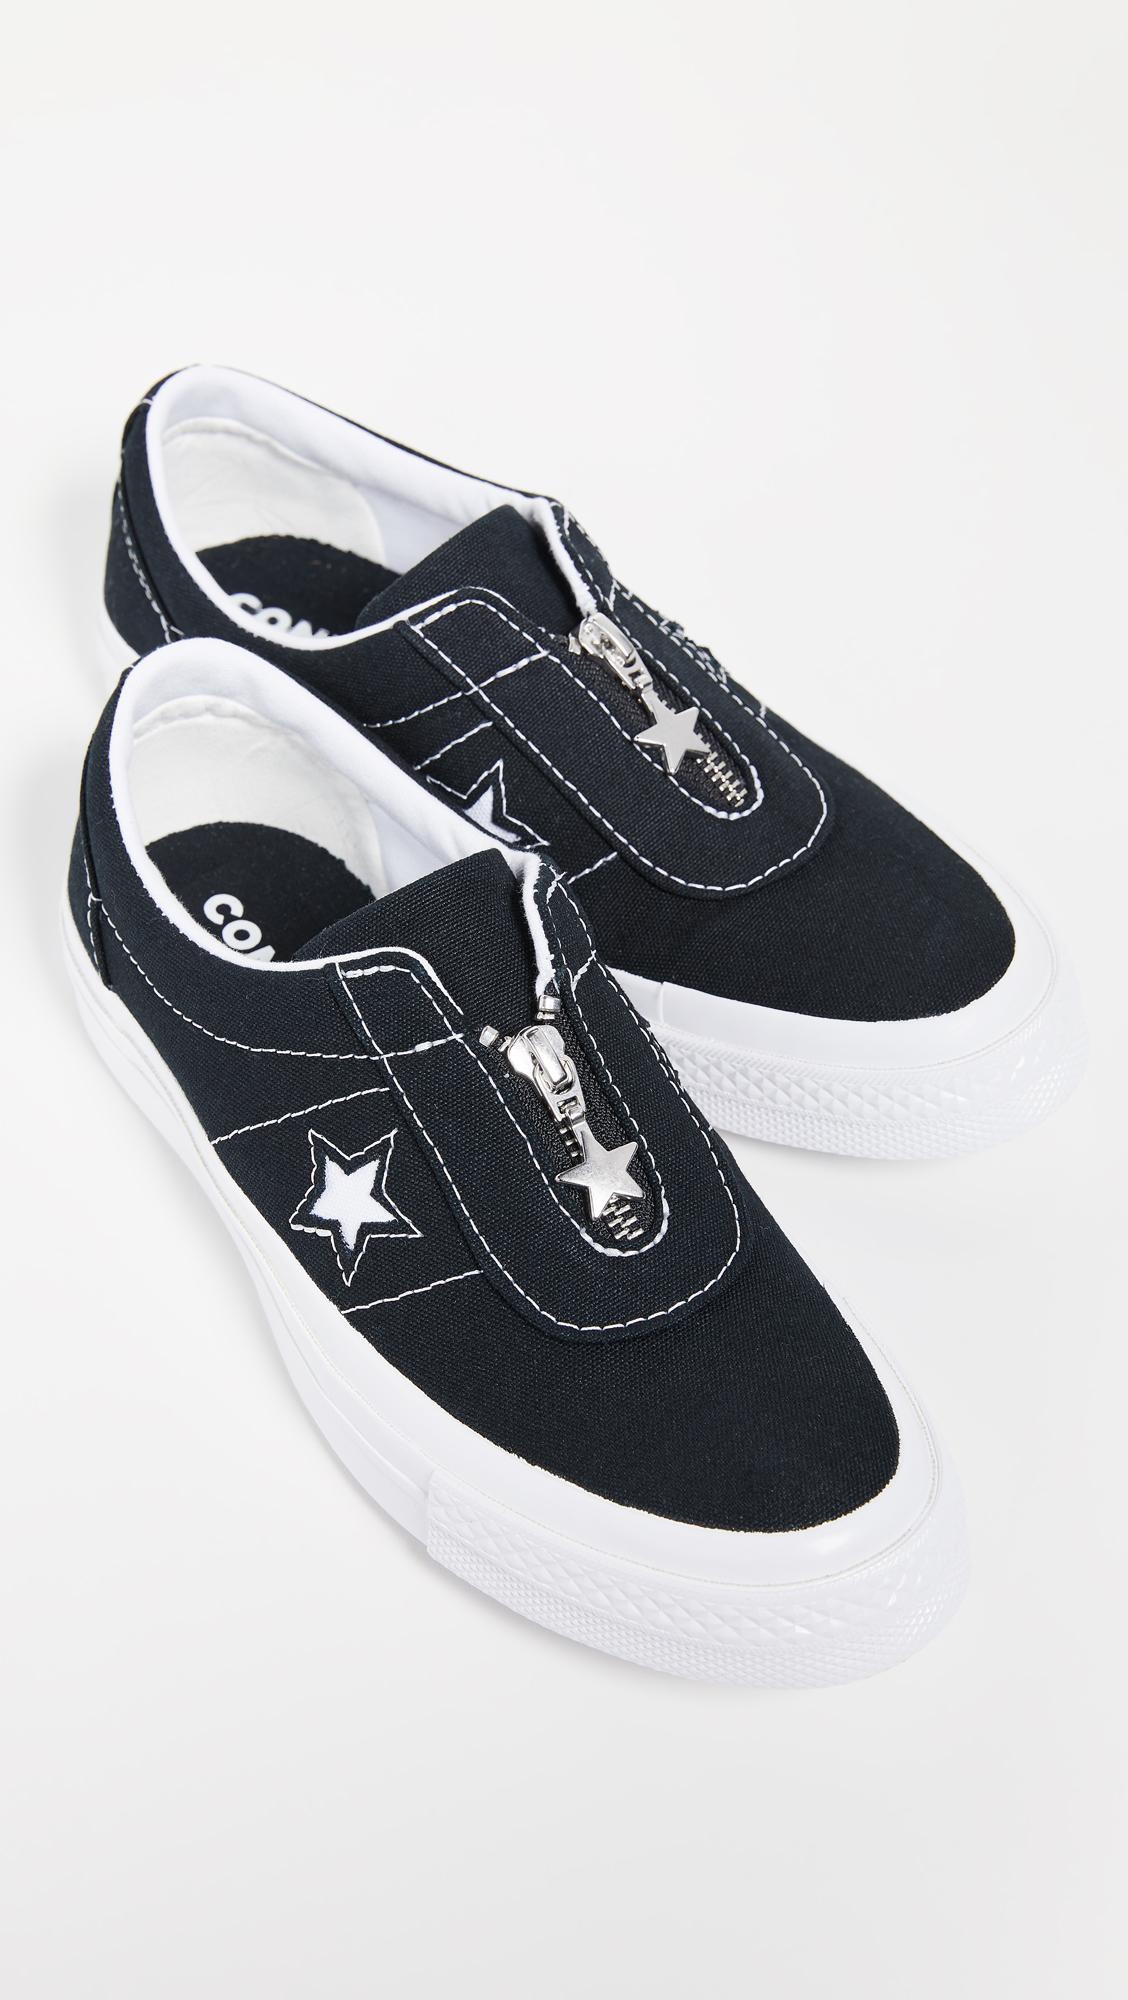 Converse Canvas One Star Slip Sun Baked Sneakers in Black/White (Black) |  Lyst